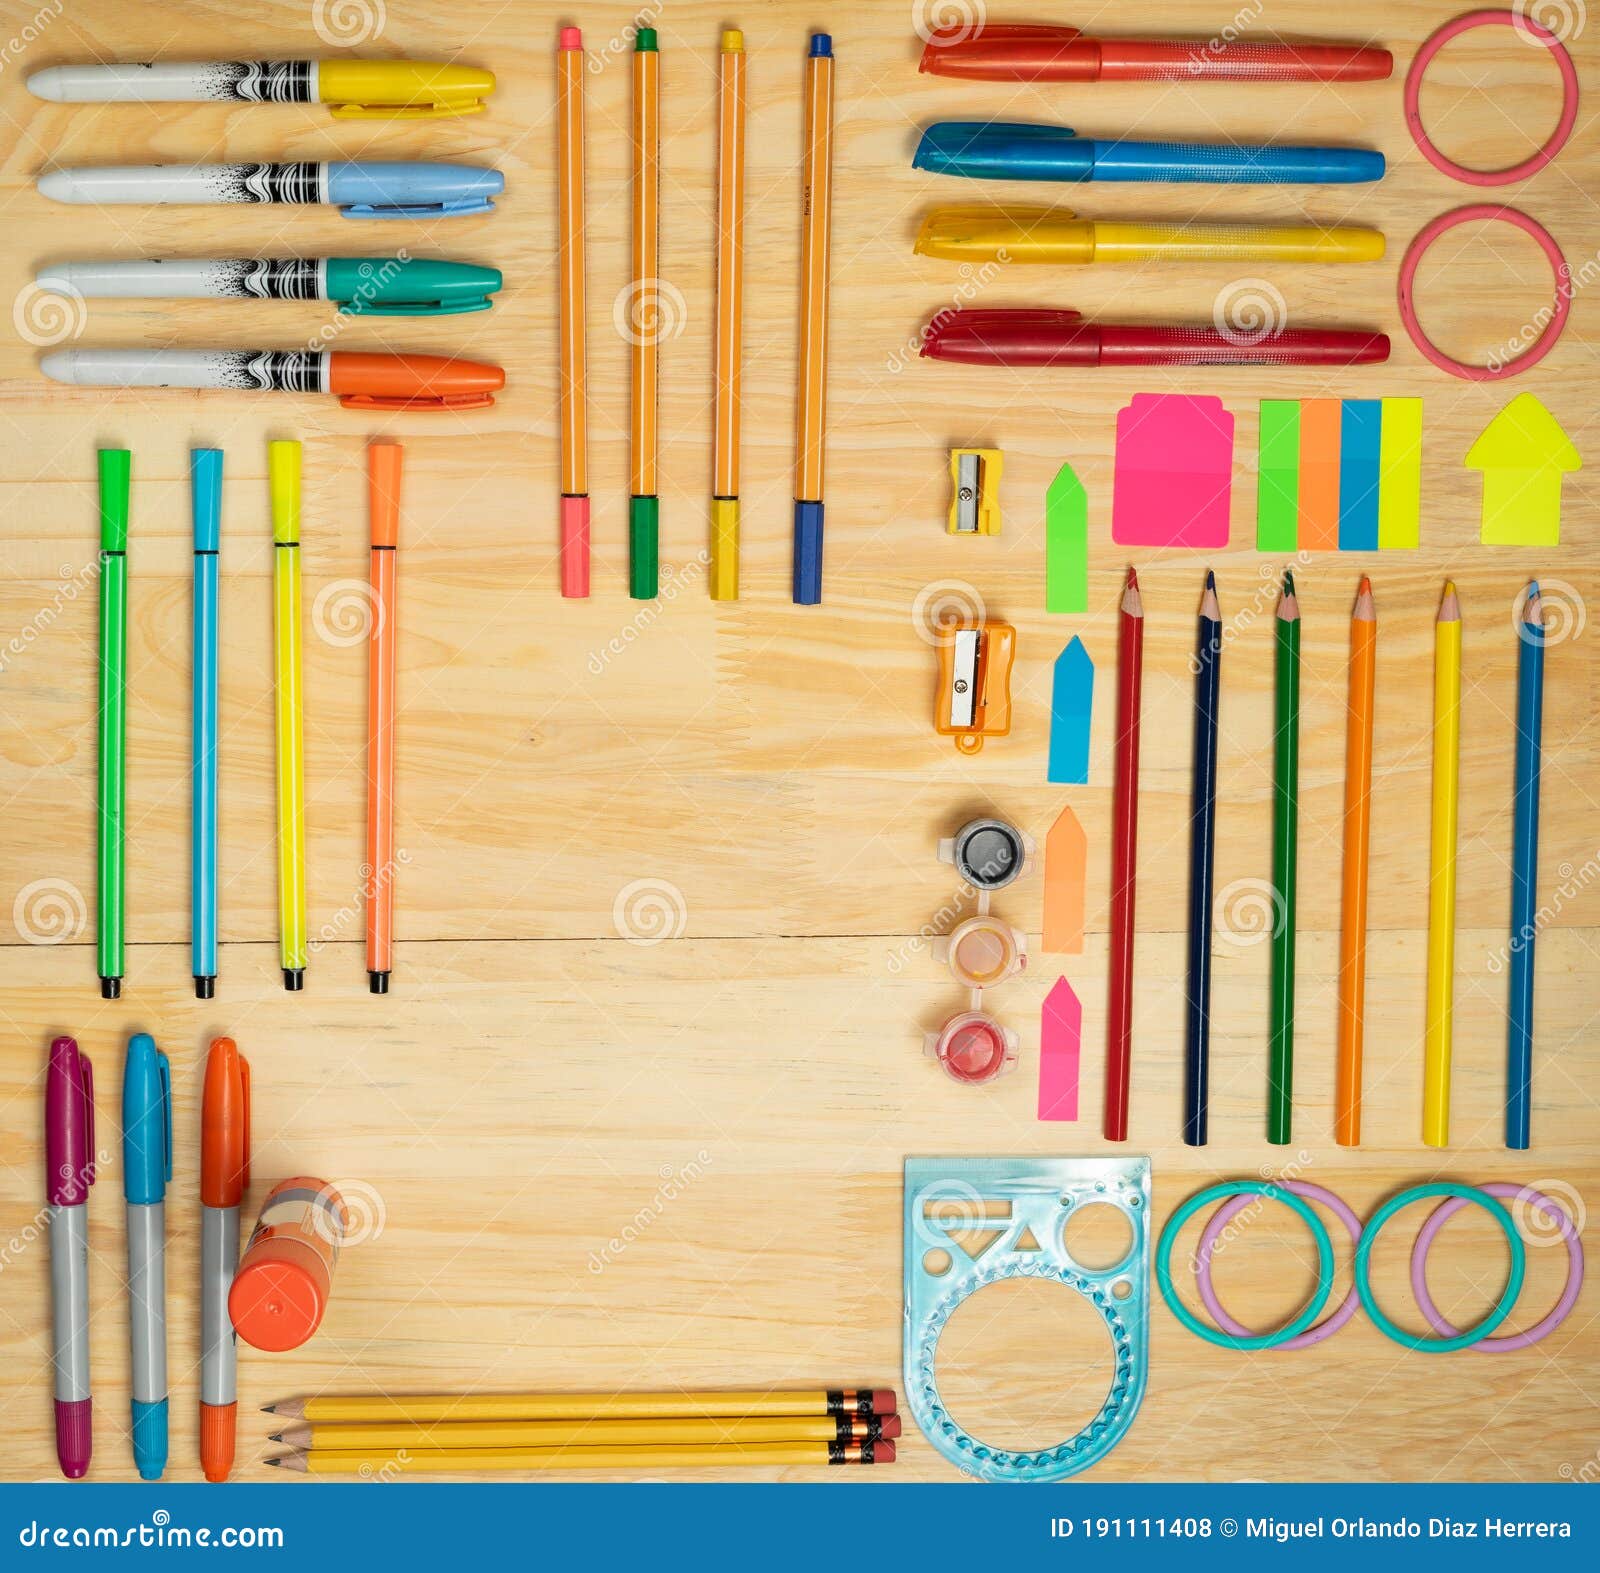 pencils and utensils for drawing and working